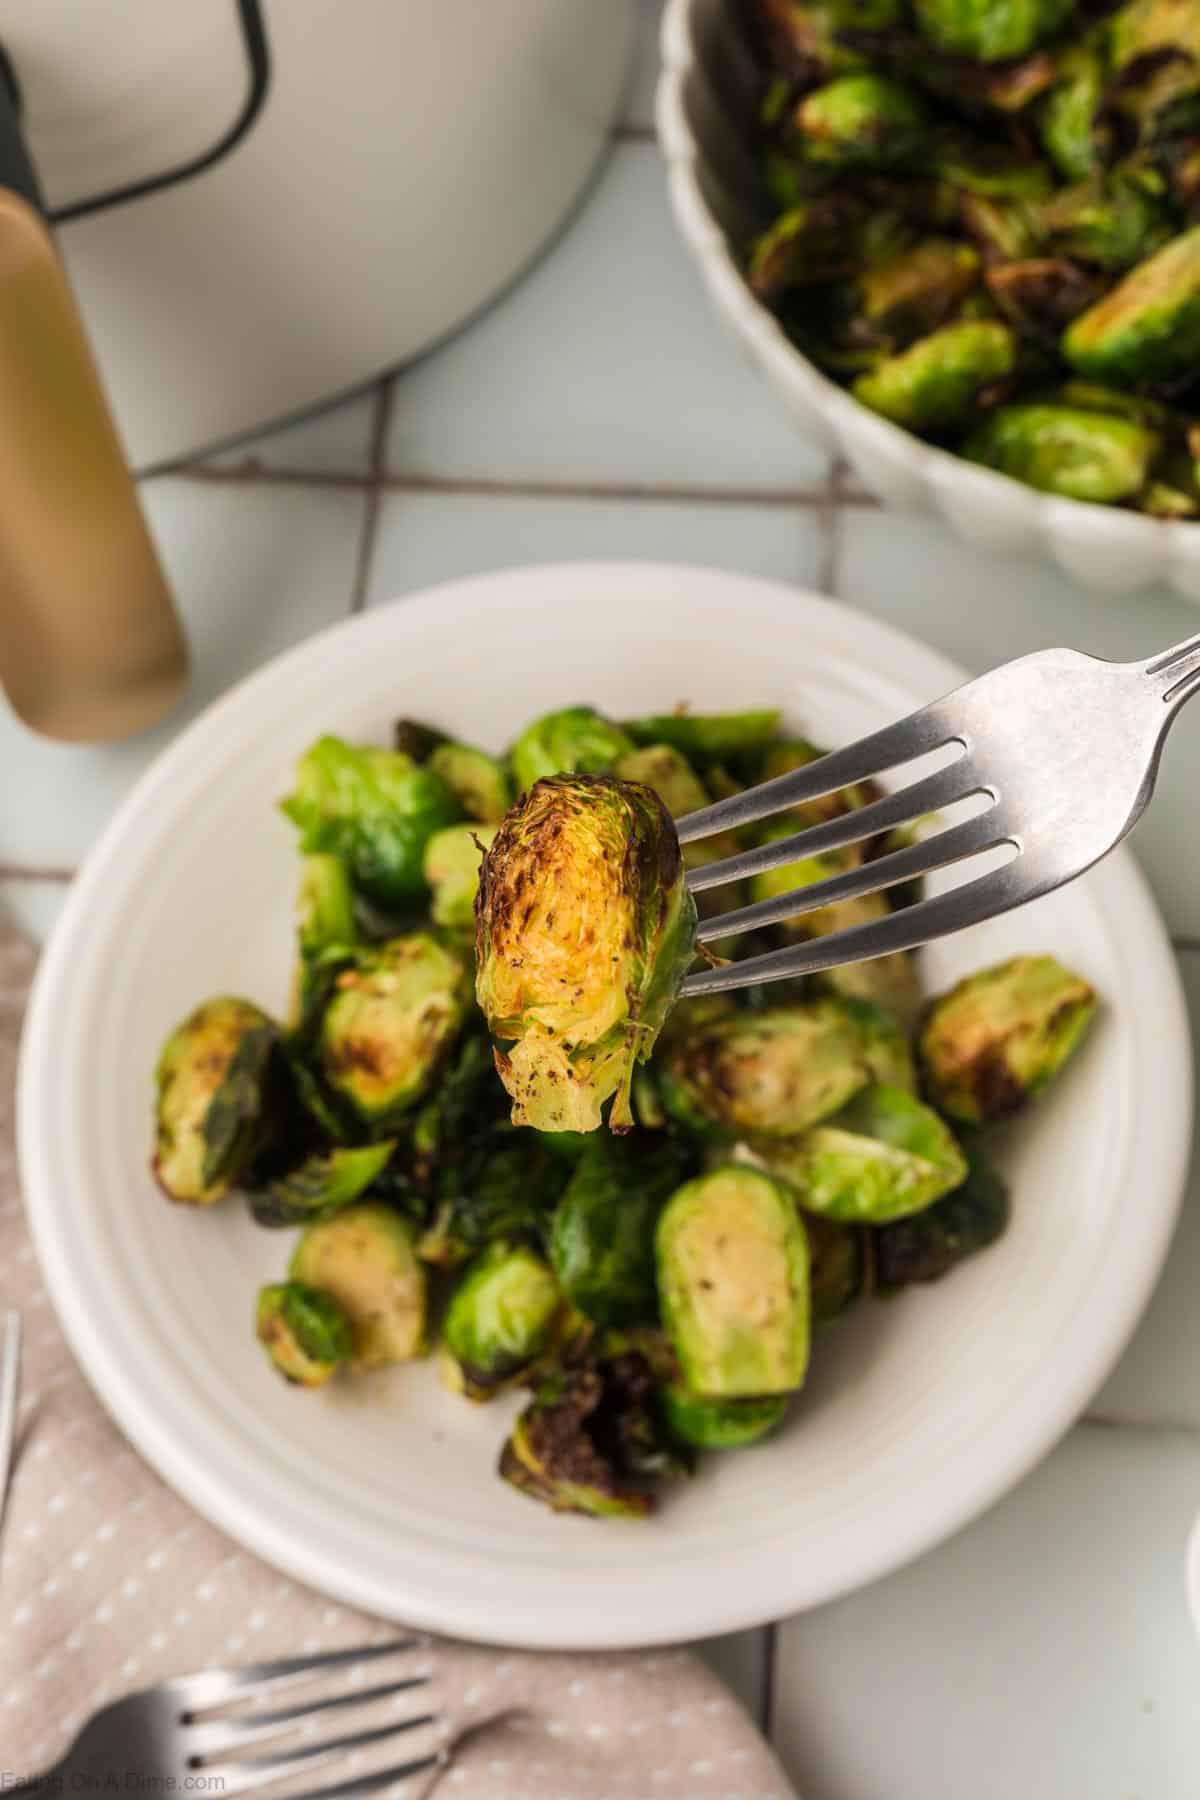 A fork holds a charred Brussels sprout over a white plate filled with roasted Brussels sprouts. A bowl of additional Brussels sprouts and a bottle of dressing are visible in the background, all set on a tiled surface, showcasing an air fryer brussel sprouts recipe at its finest.